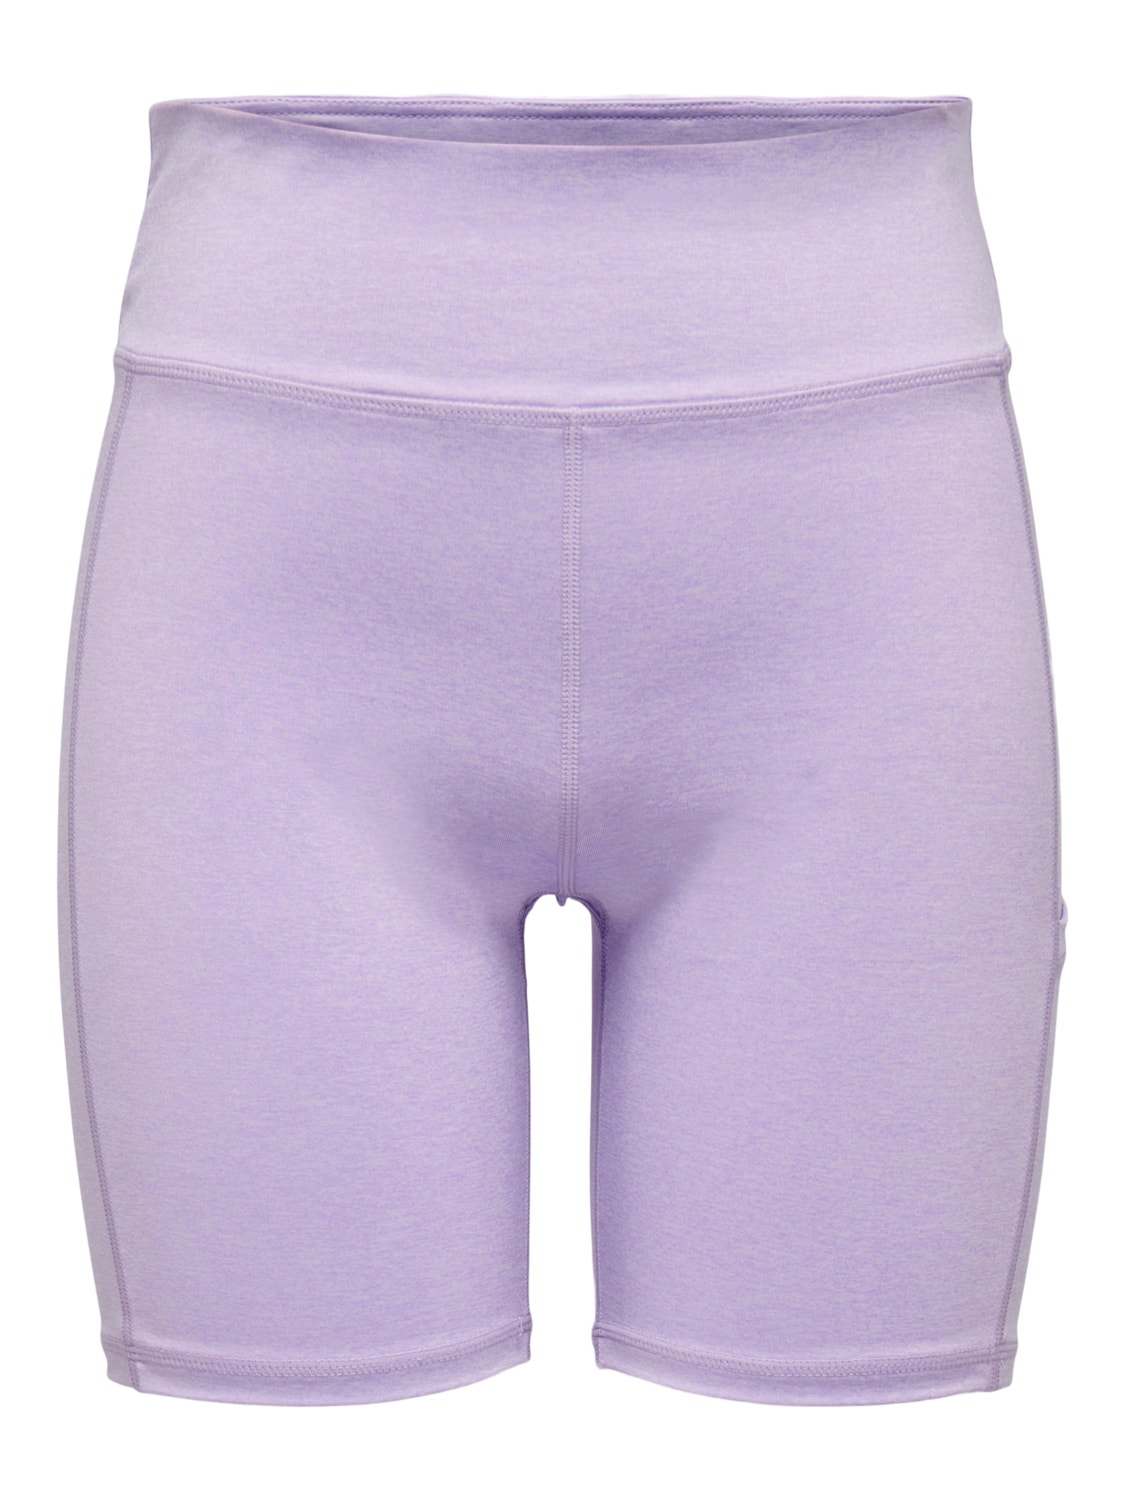 ONLY Shorts Slim Fit -Purple Rose - 15283881